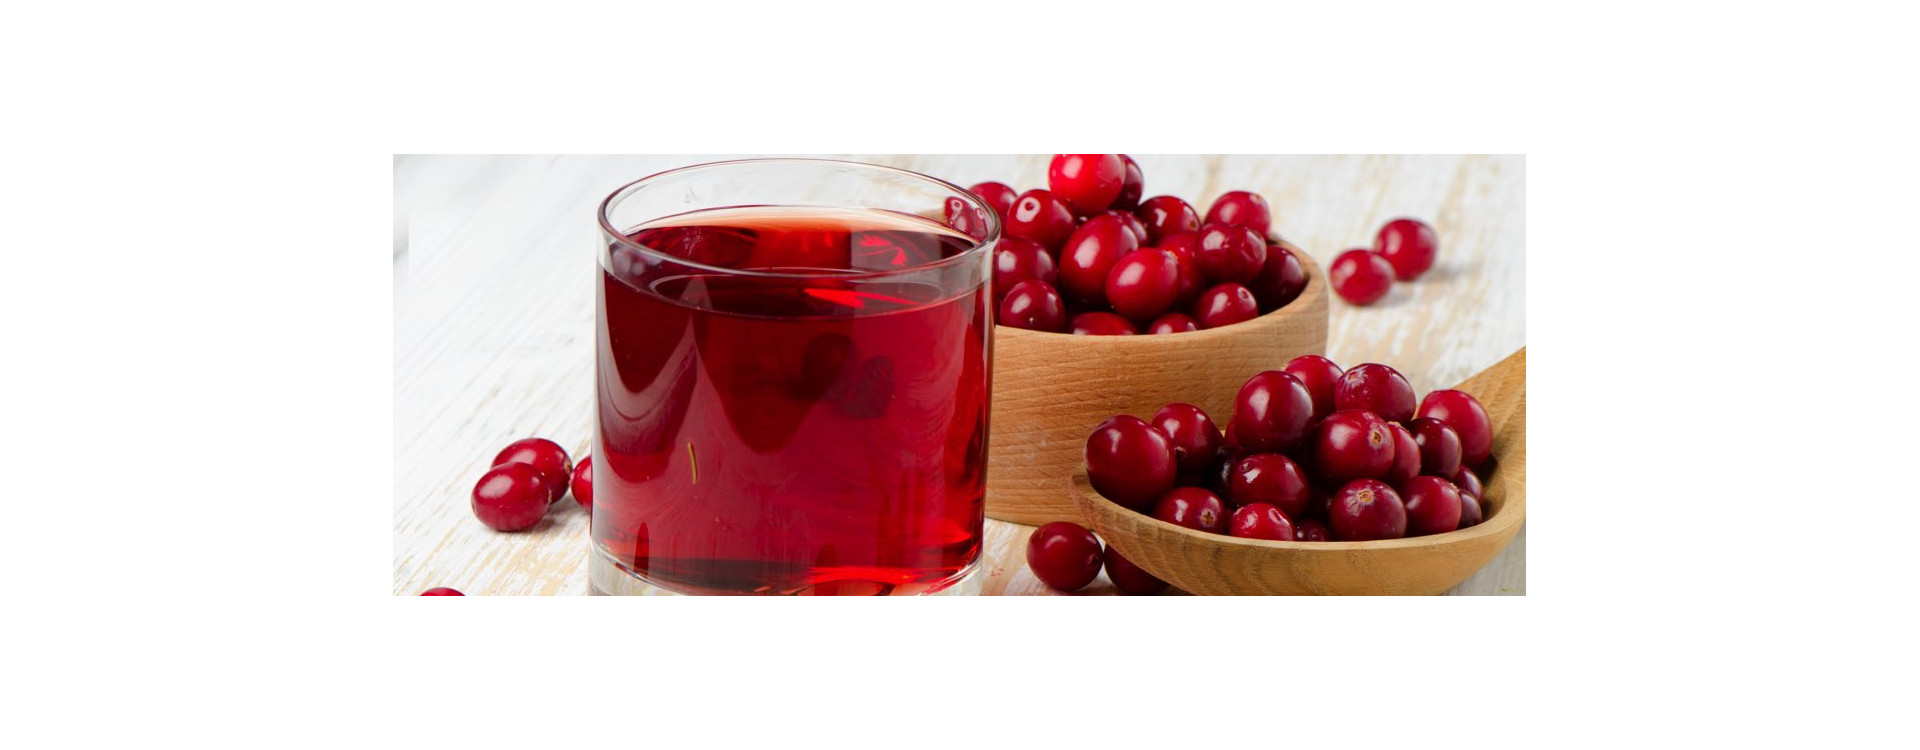 Is Cranberry Juice Effective For High Blood Pressure